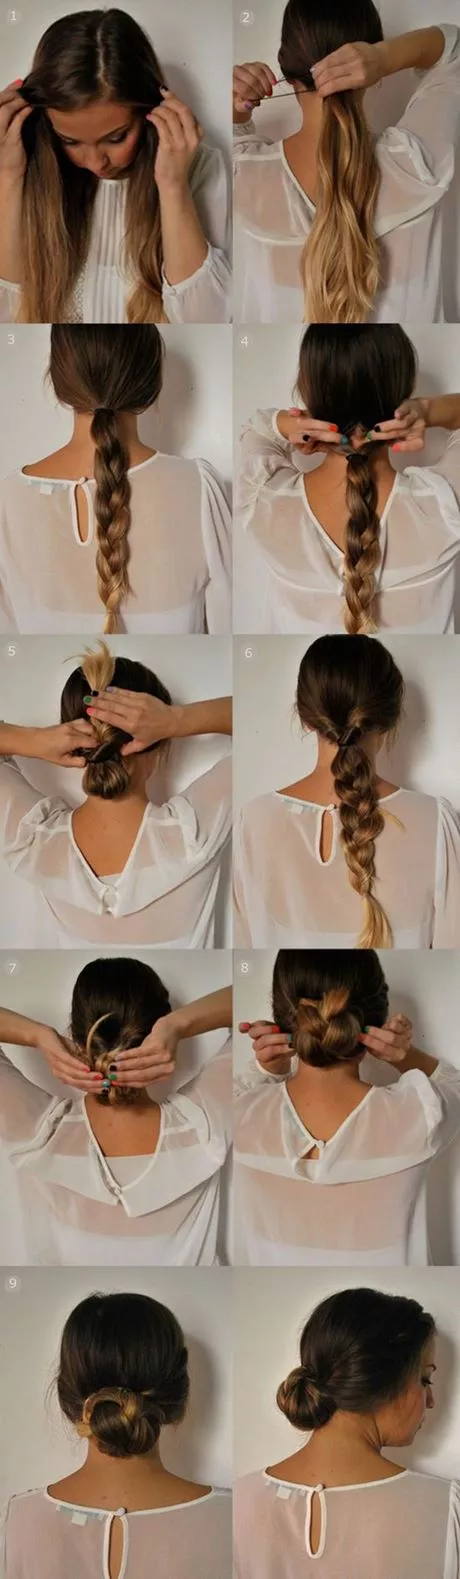 Simple but pretty hairstyles simple-but-pretty-hairstyles-72_12-5-5